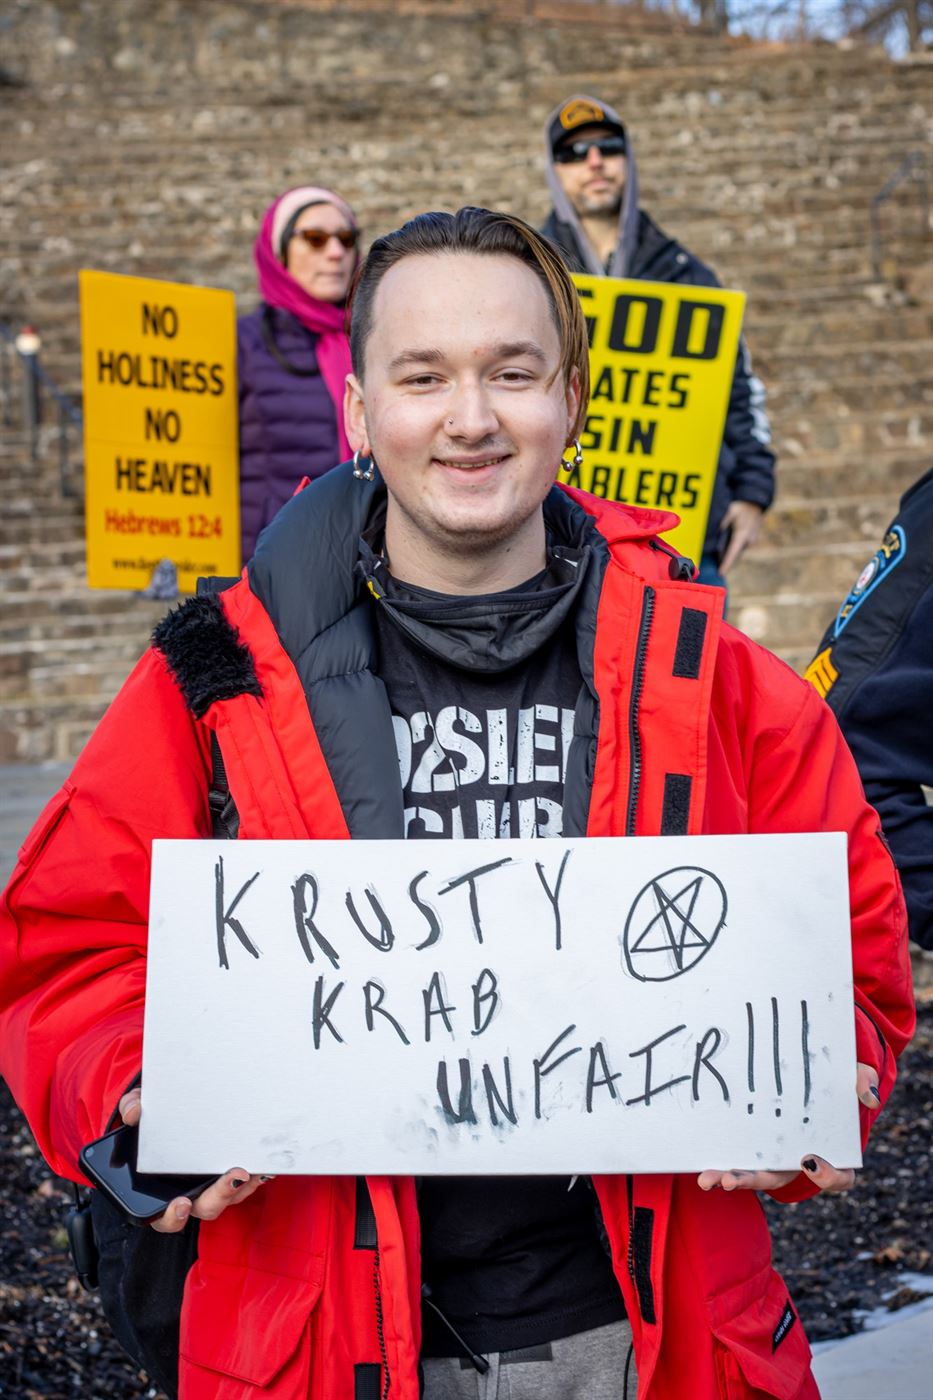 A student holds up a "Krusty Krab Unfair" sign, mocking the protesters. John LaRosa | The Montclarion